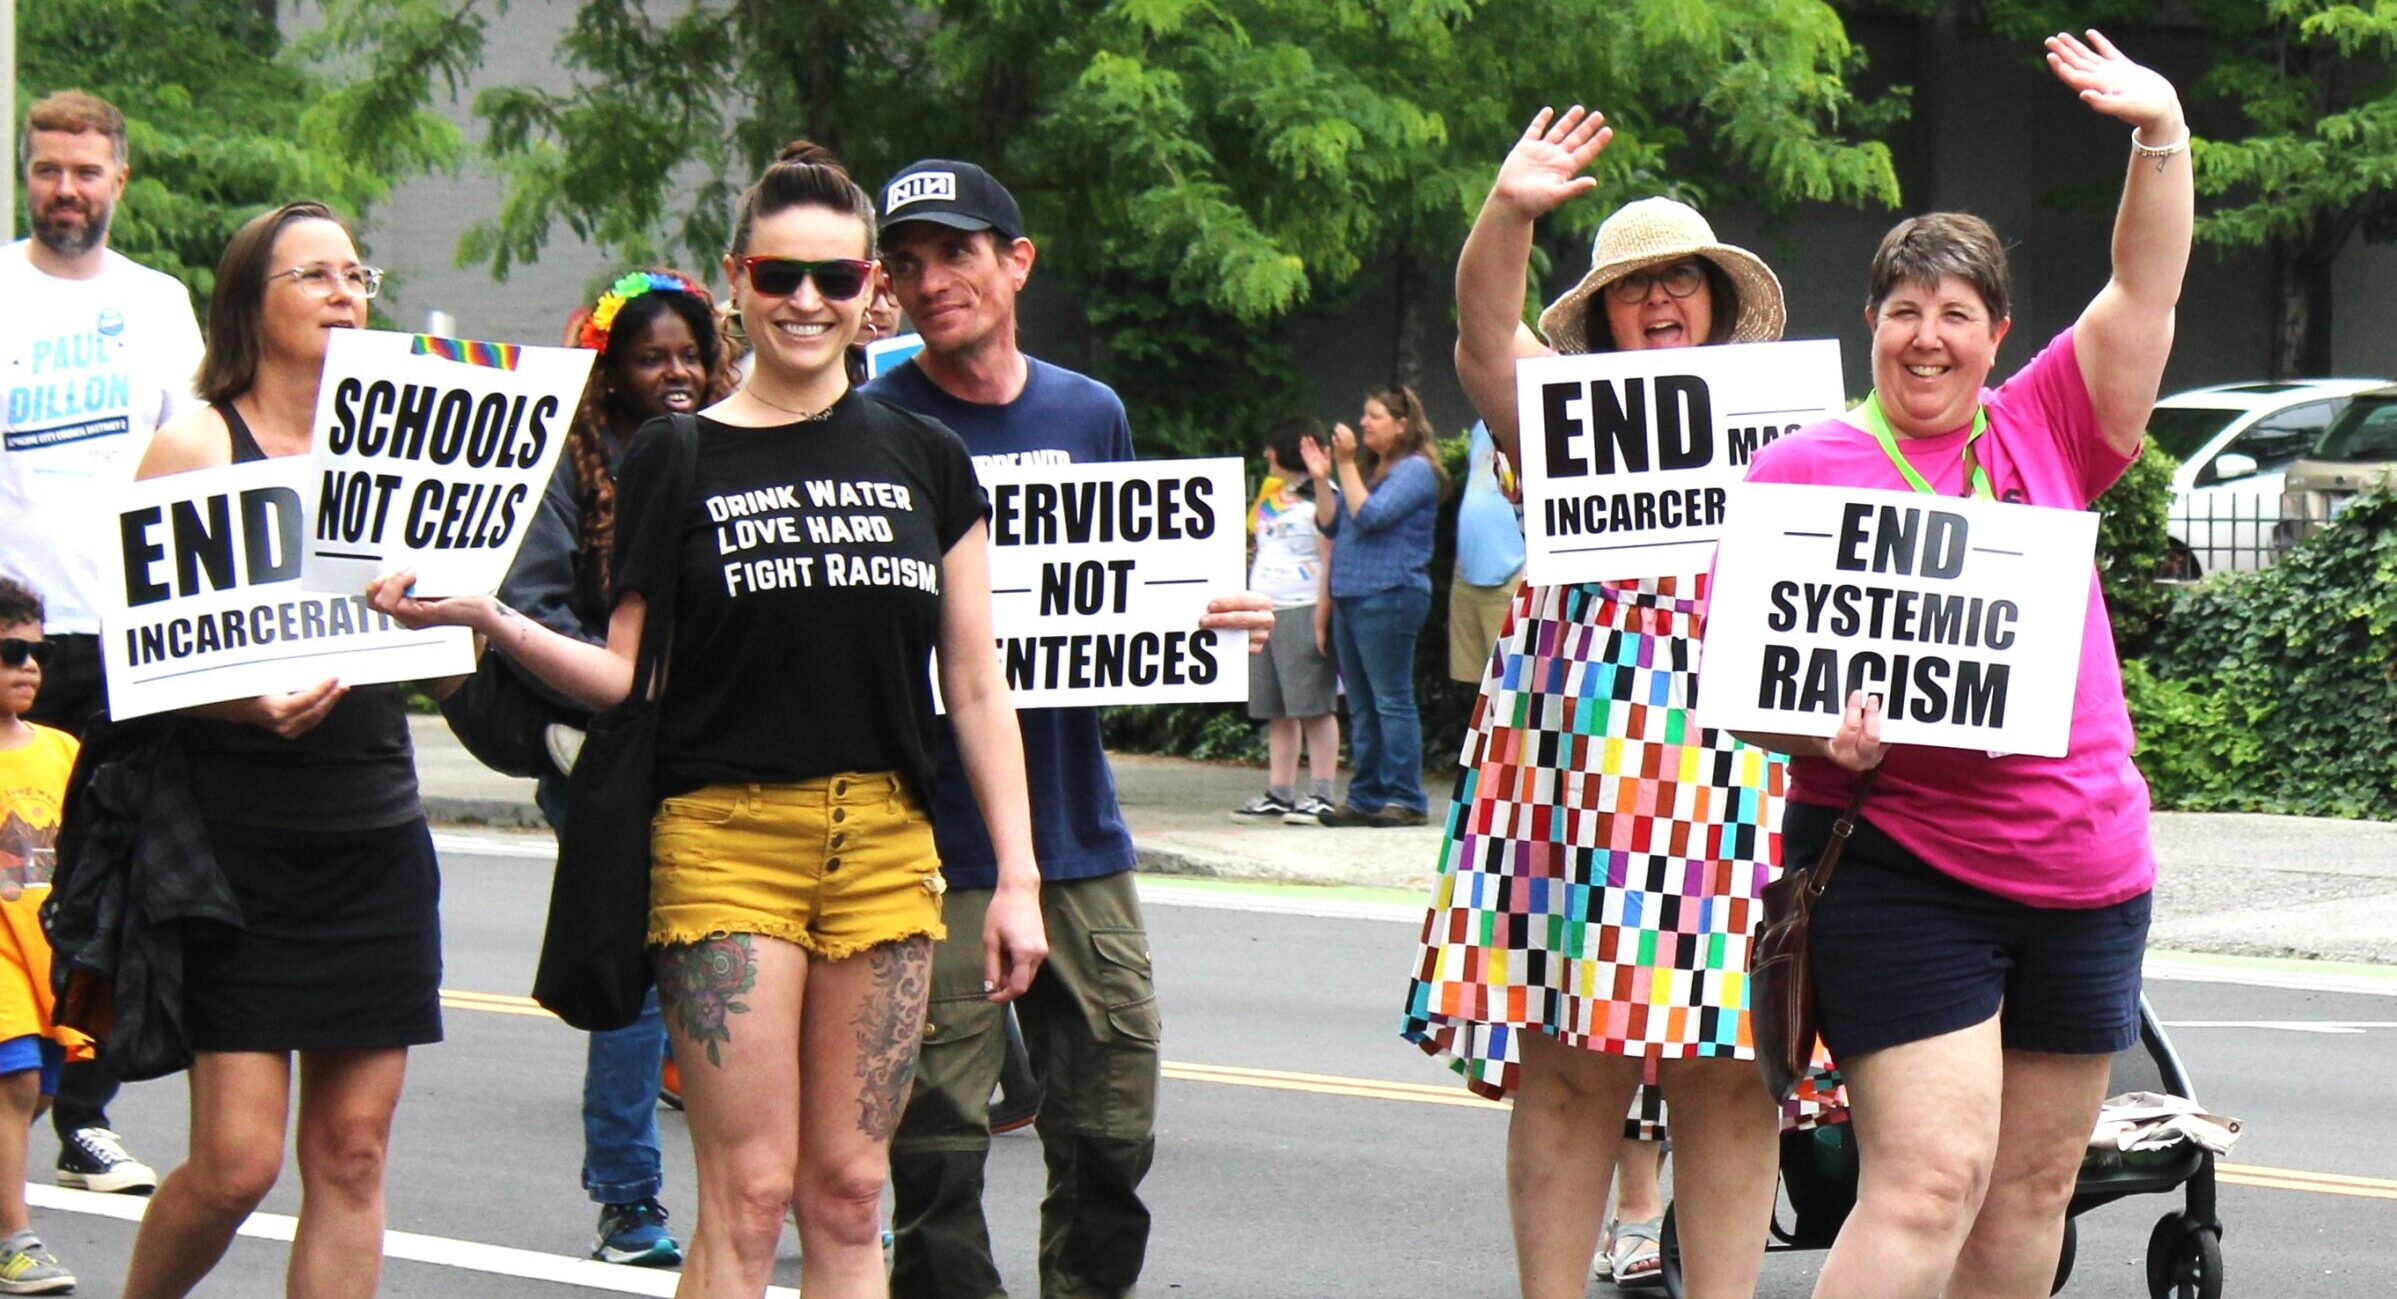 Image of multiple people marching in 2023 spokane pride parade with signs that read "end systemic racism", "end mass incarceration", "services not sentences", and more